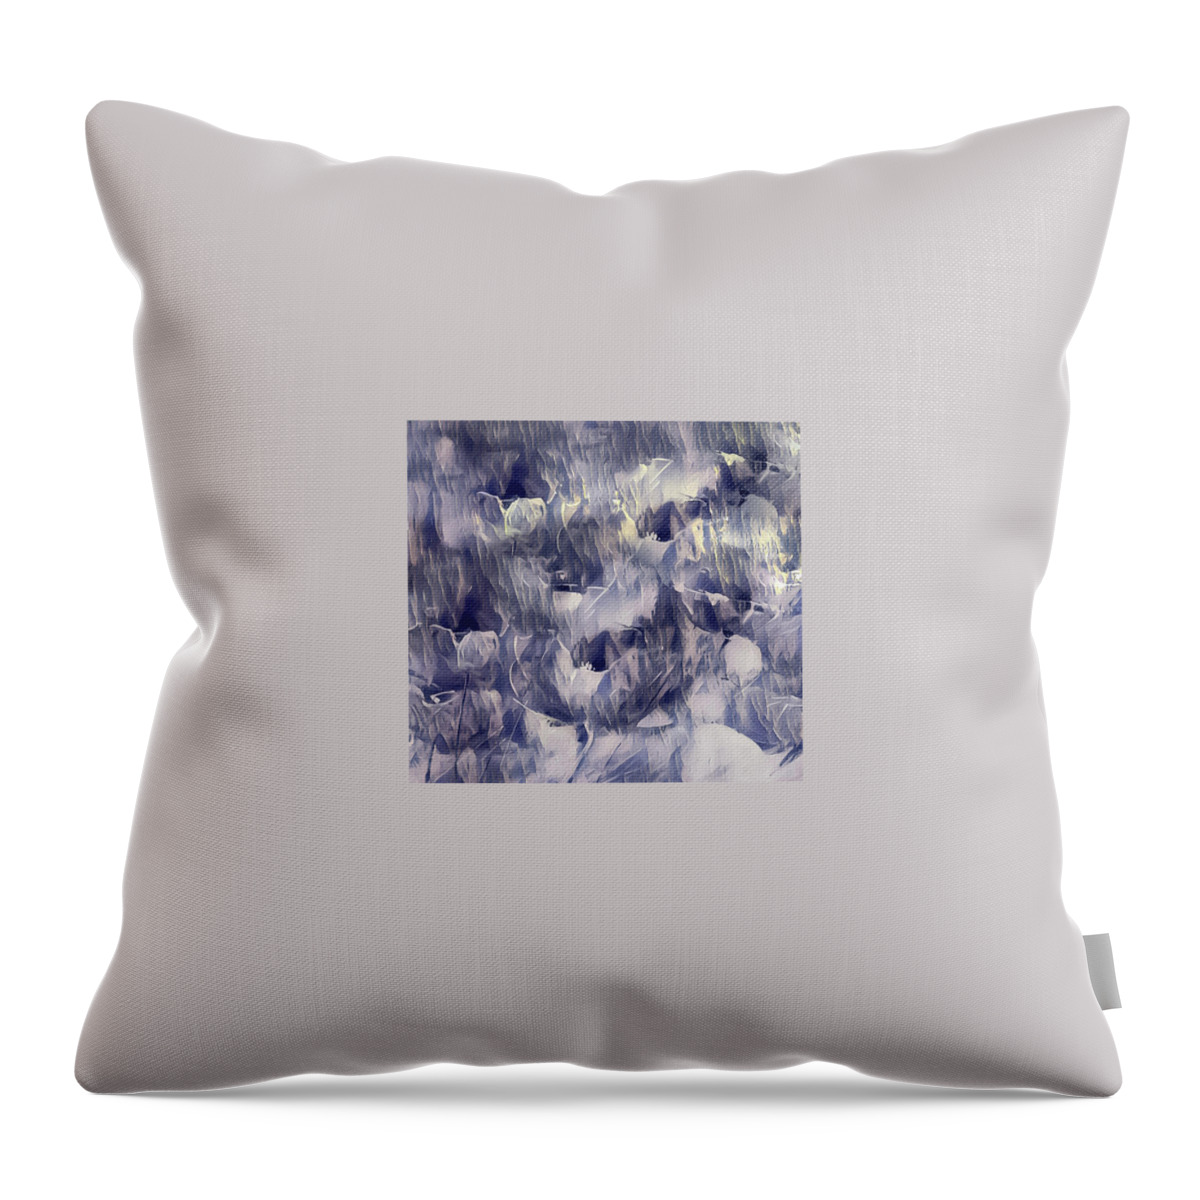 Petals Throw Pillow featuring the painting A Plethora Of Light On Petals by Lisa Kaiser